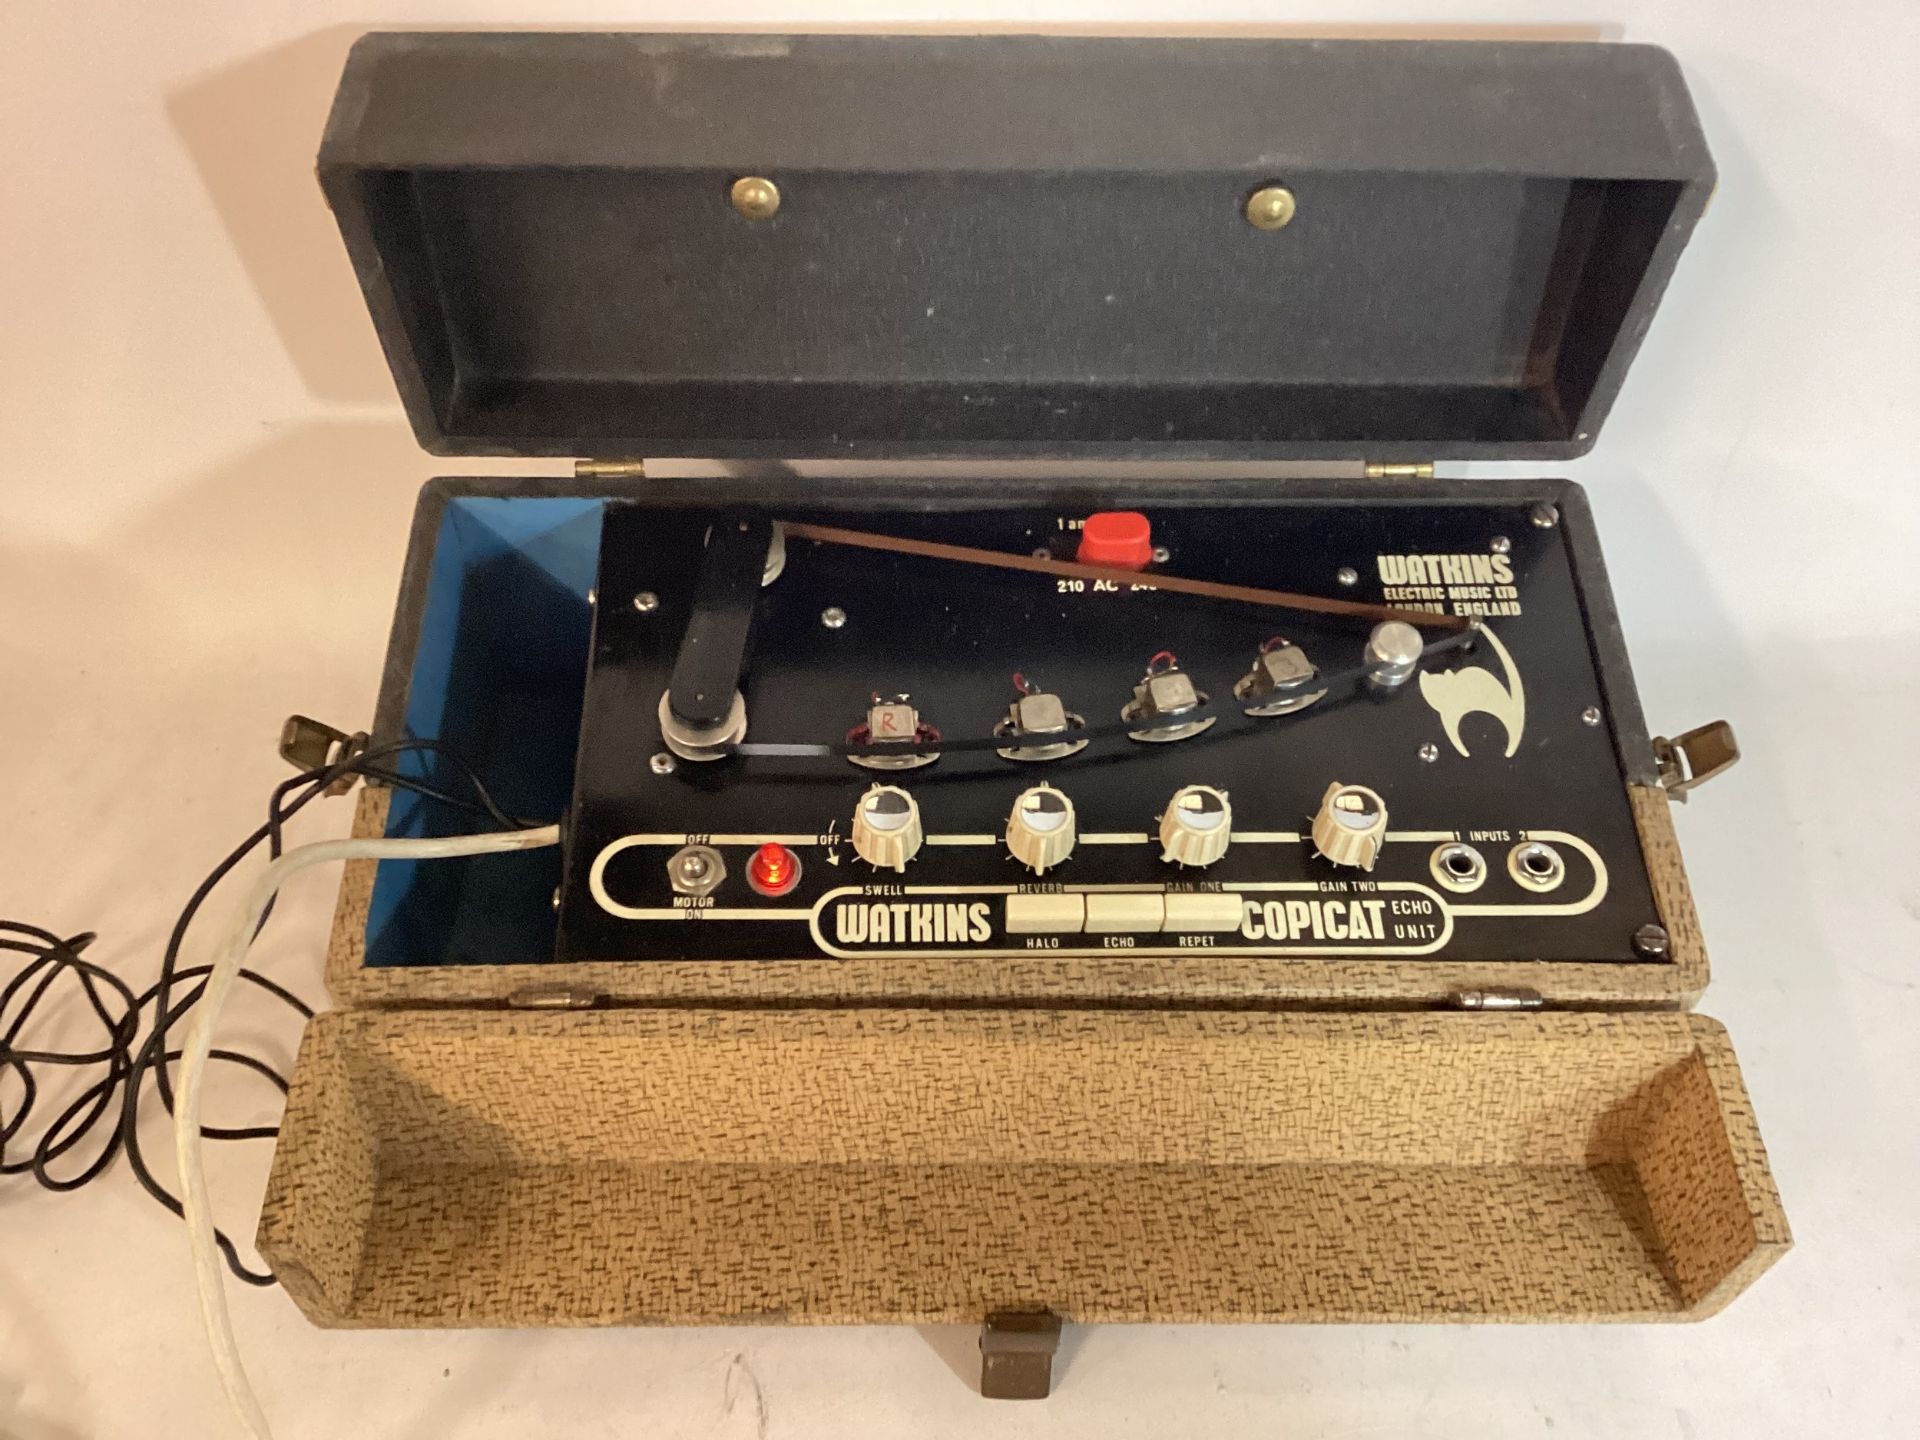 WATKINS / WEM COPICAT ECHO UNIT. The Copicat was the first independent tape loop echo unit to exist.